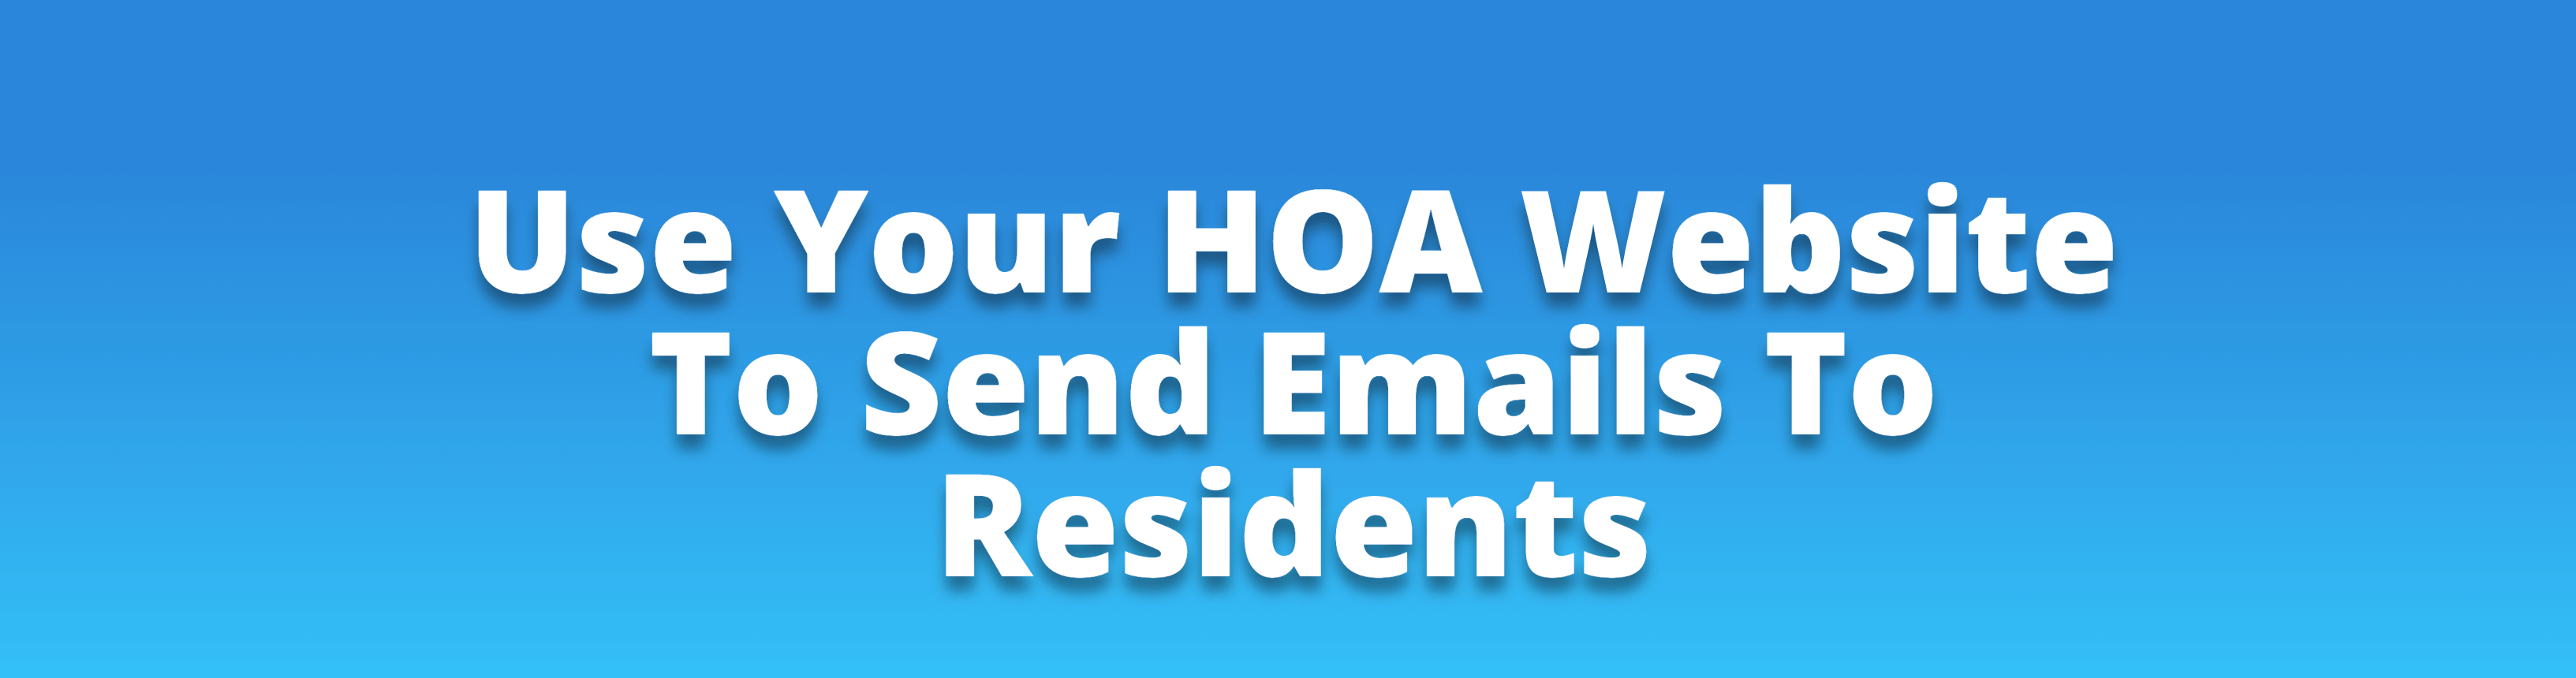 Increase Communication With An HOA Website